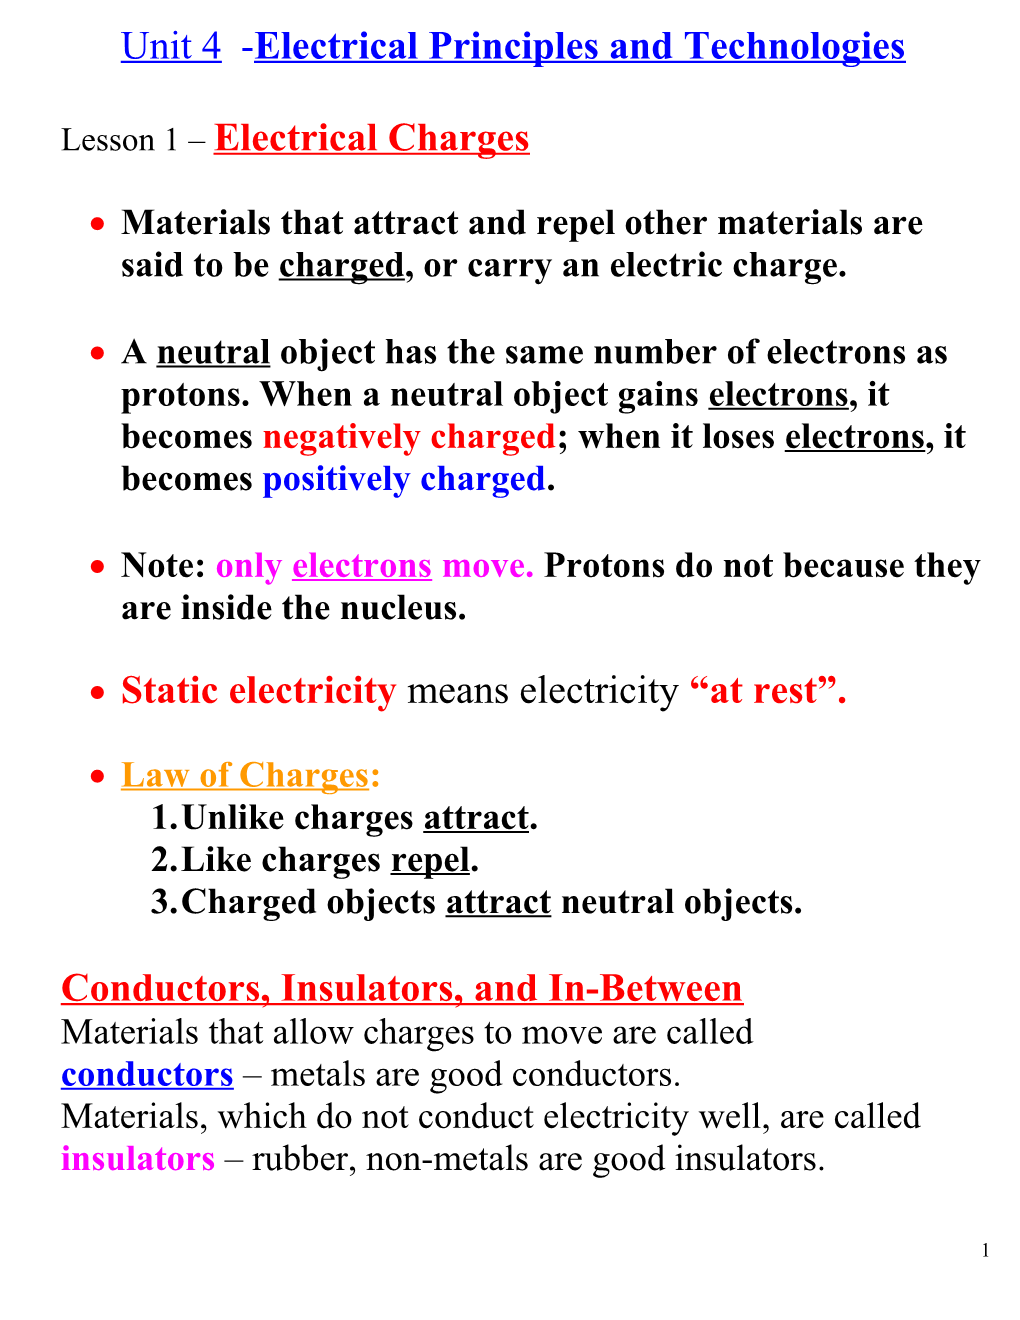 Unit 4- Electrical Principles and Technologies